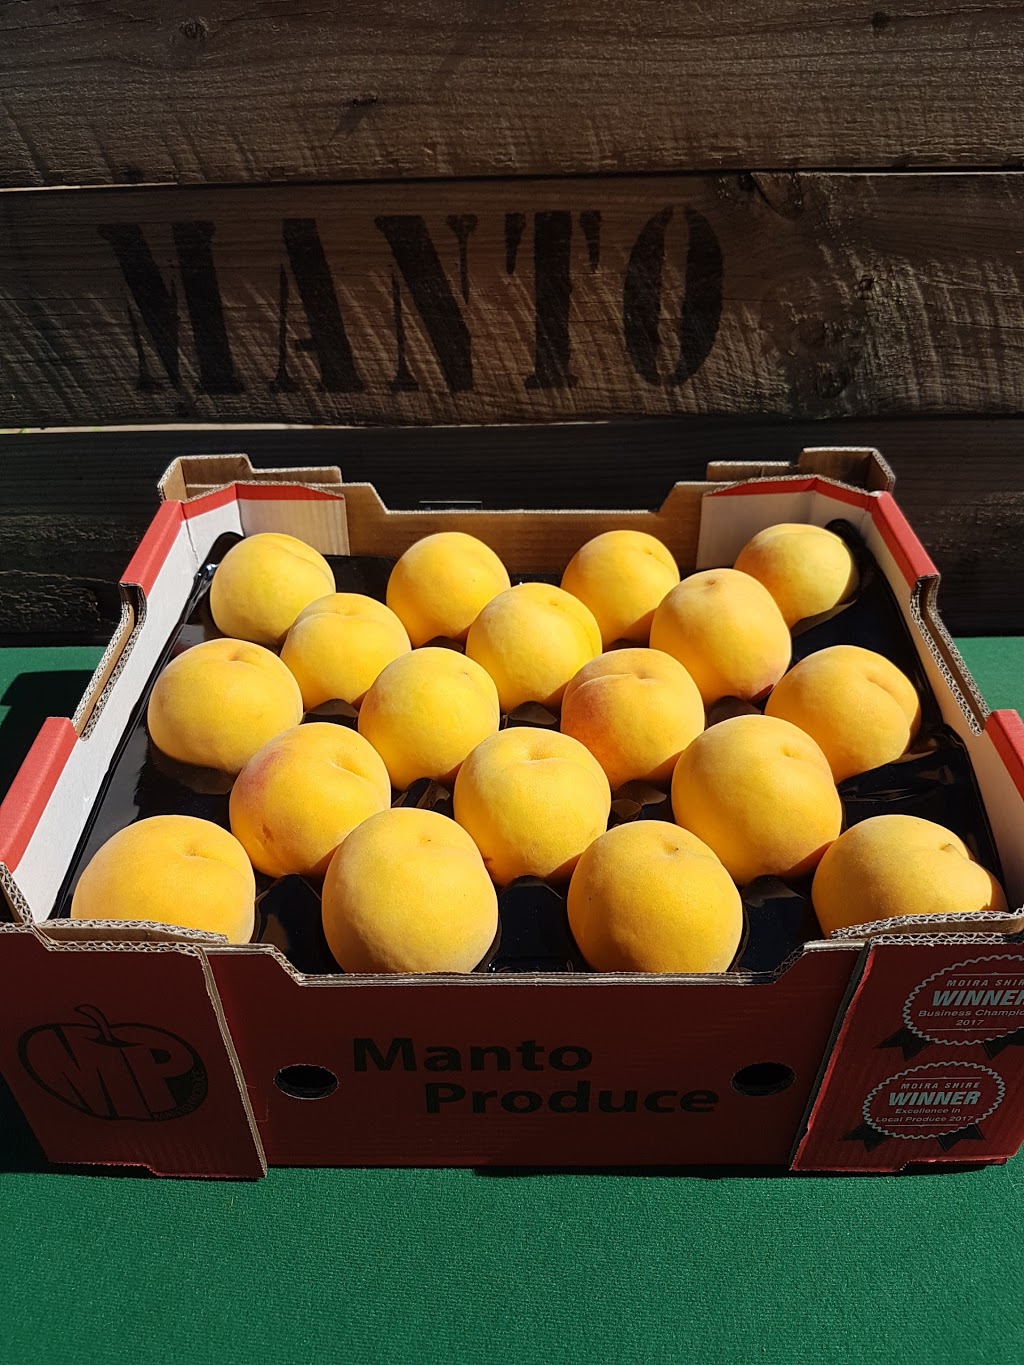 Manto Produce | store | 293 Campbell Rd, Cobram VIC 3644, Australia | 0408174466 OR +61 408 174 466